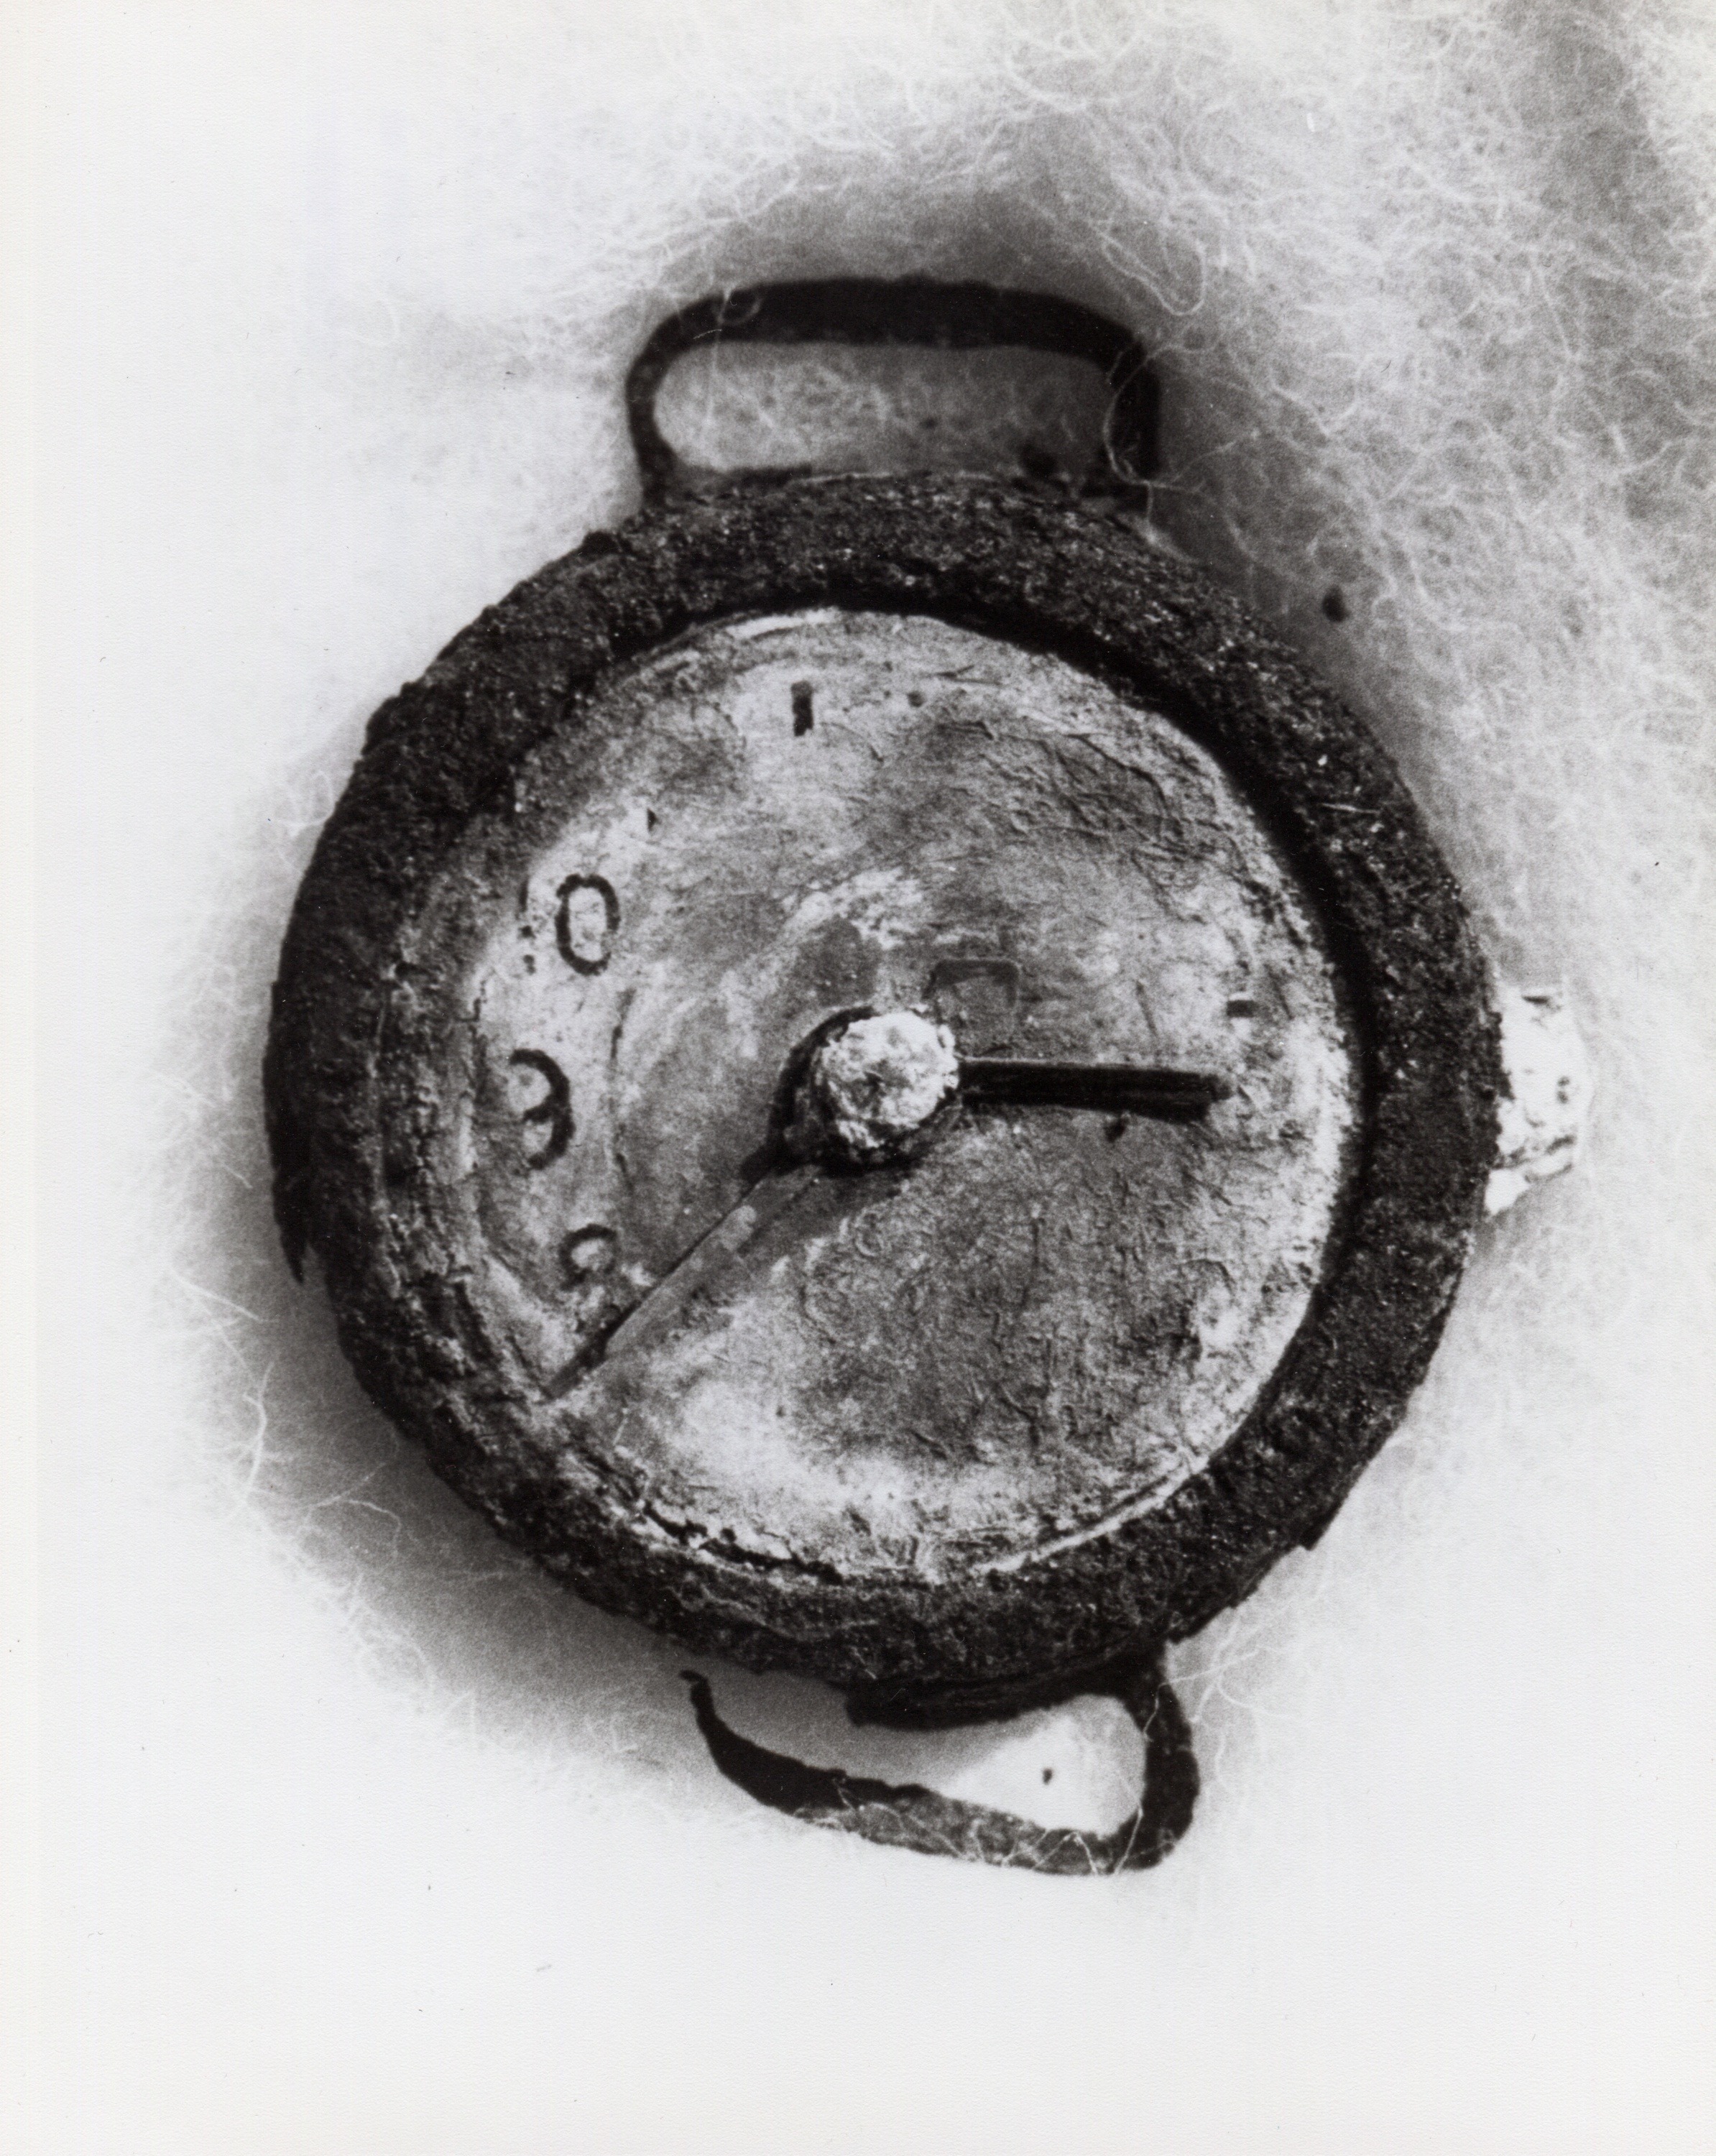 “A watch stopped at 08:15 AM found in Hiroshima”